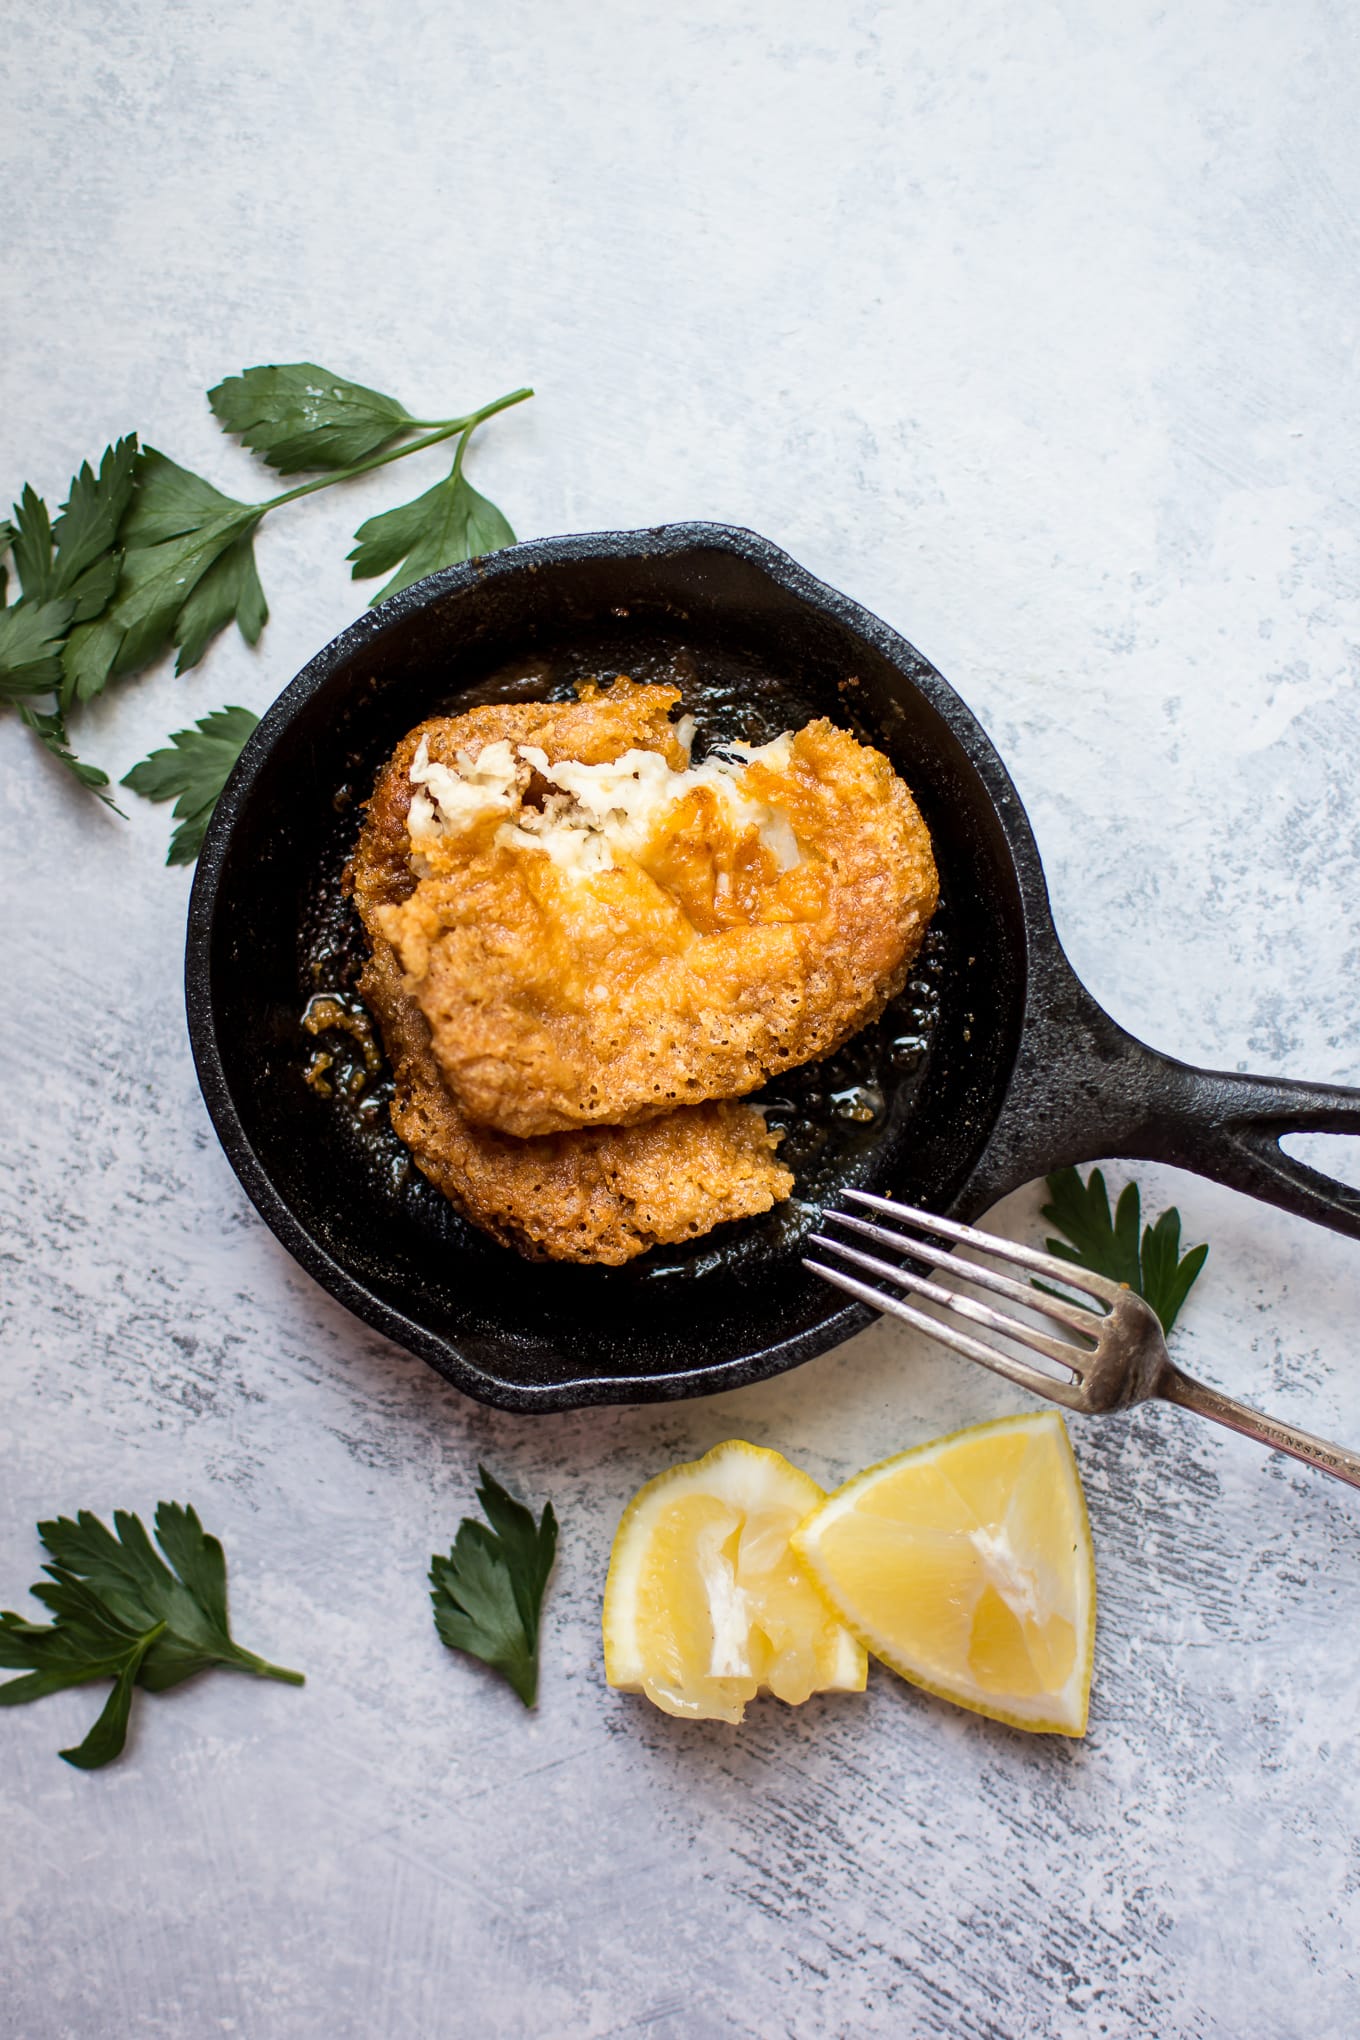 tiny frying pan with saganaki Greek fried cheese, a fork, and lemon wedges